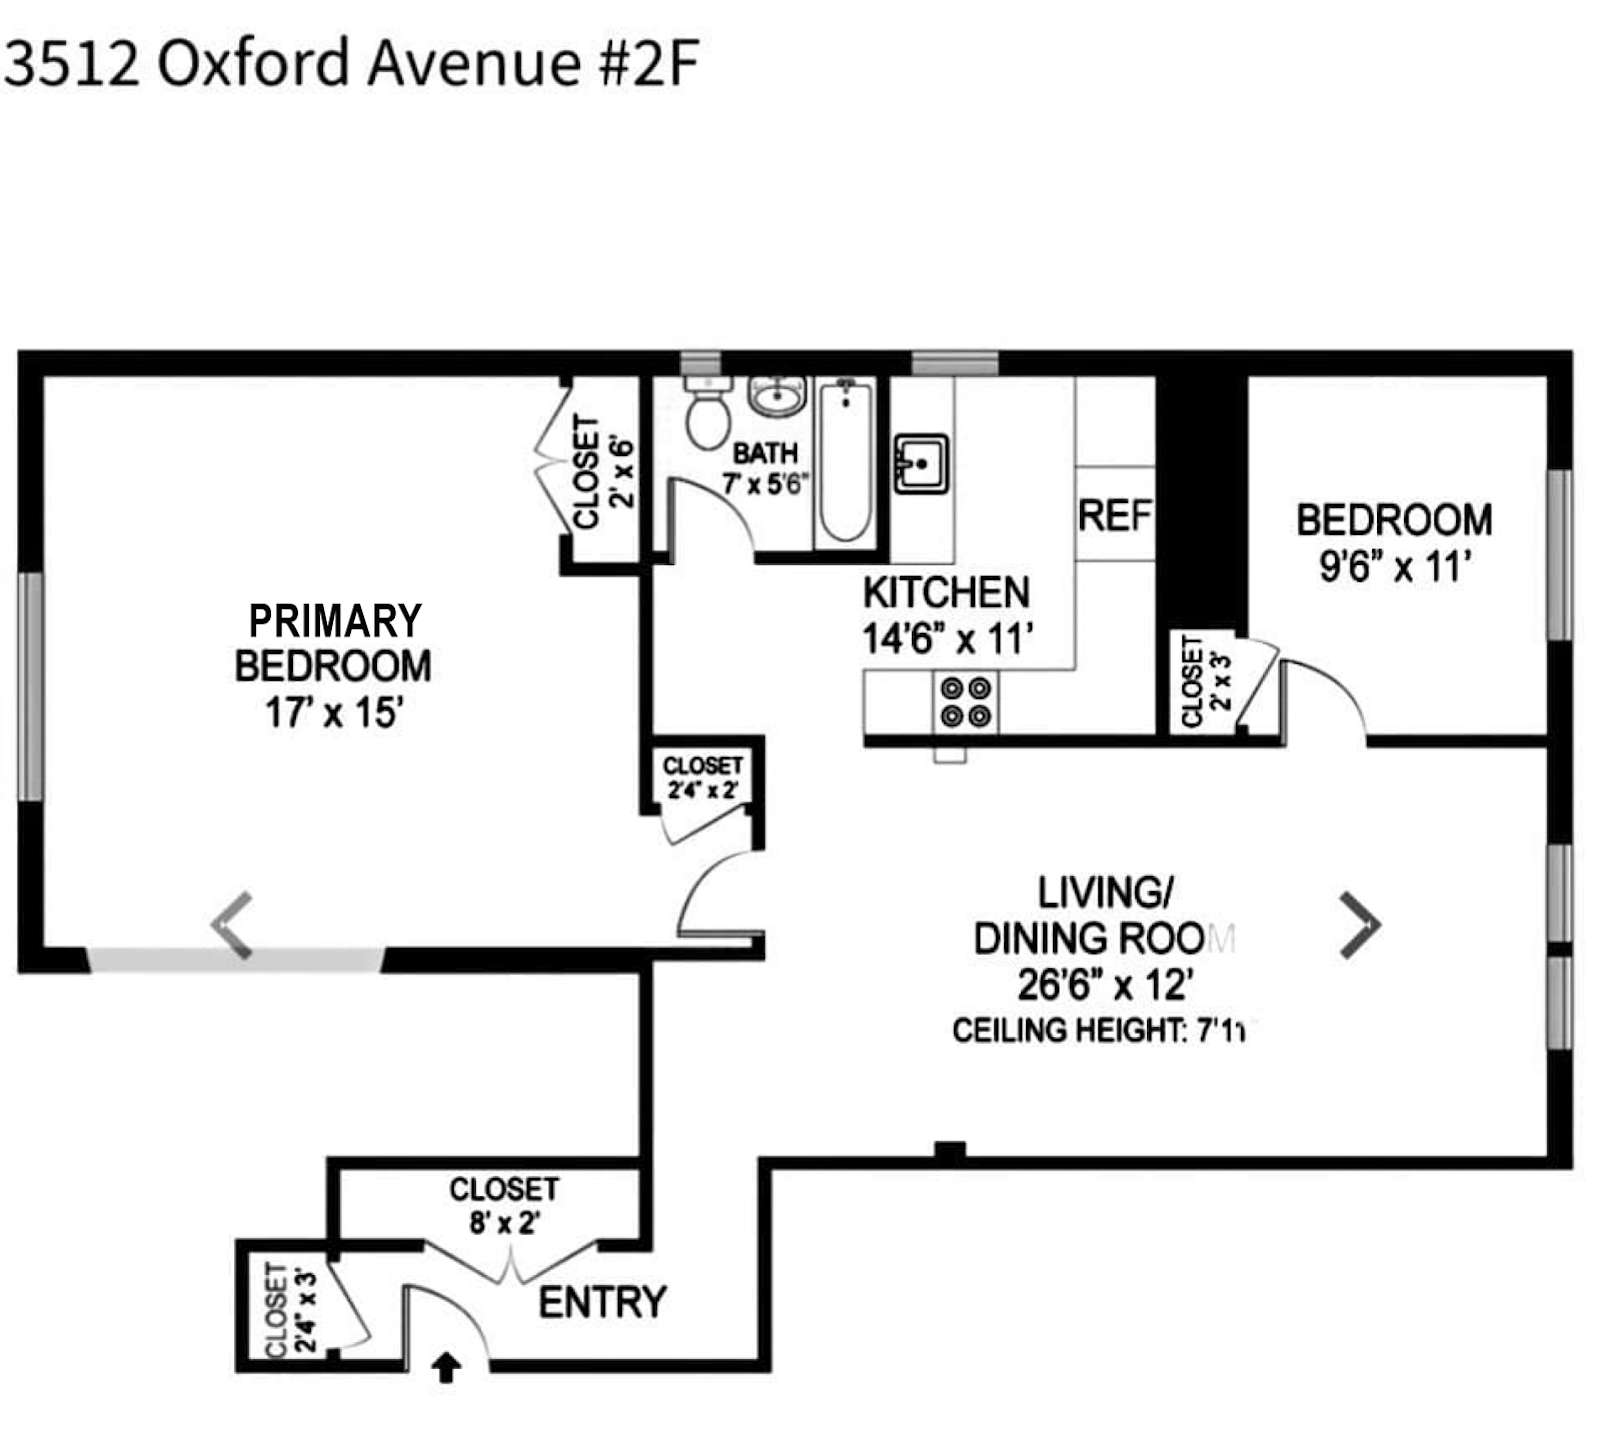 Floorplan for 3512 Oxford Ave, 2F